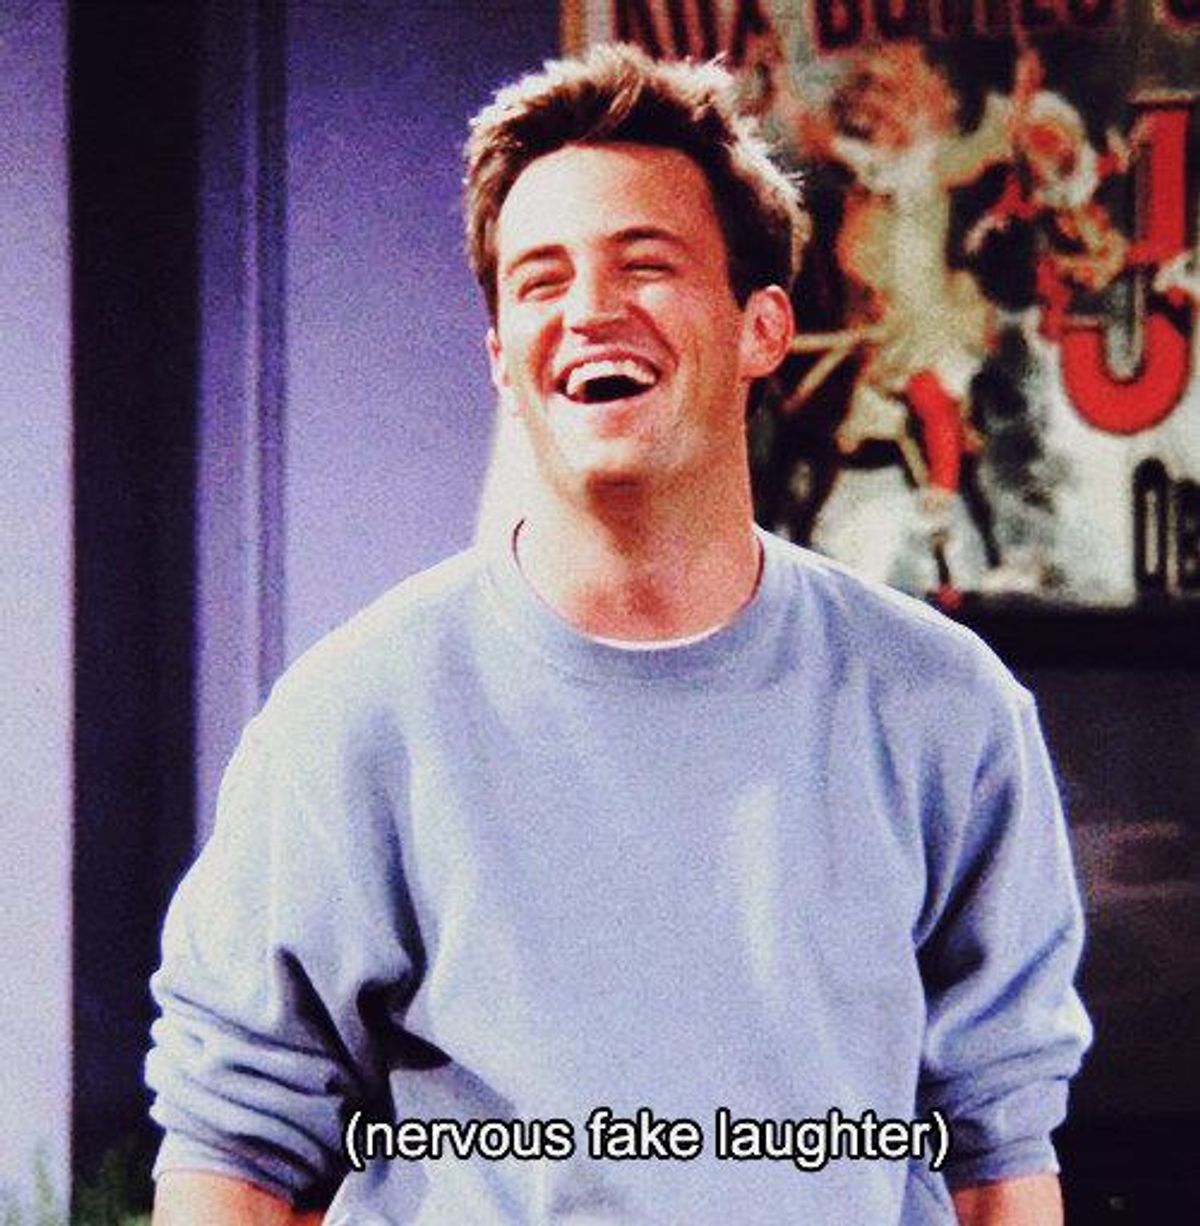 15 Reasons Why Chandler Bing Is The Best 'Friends' Character